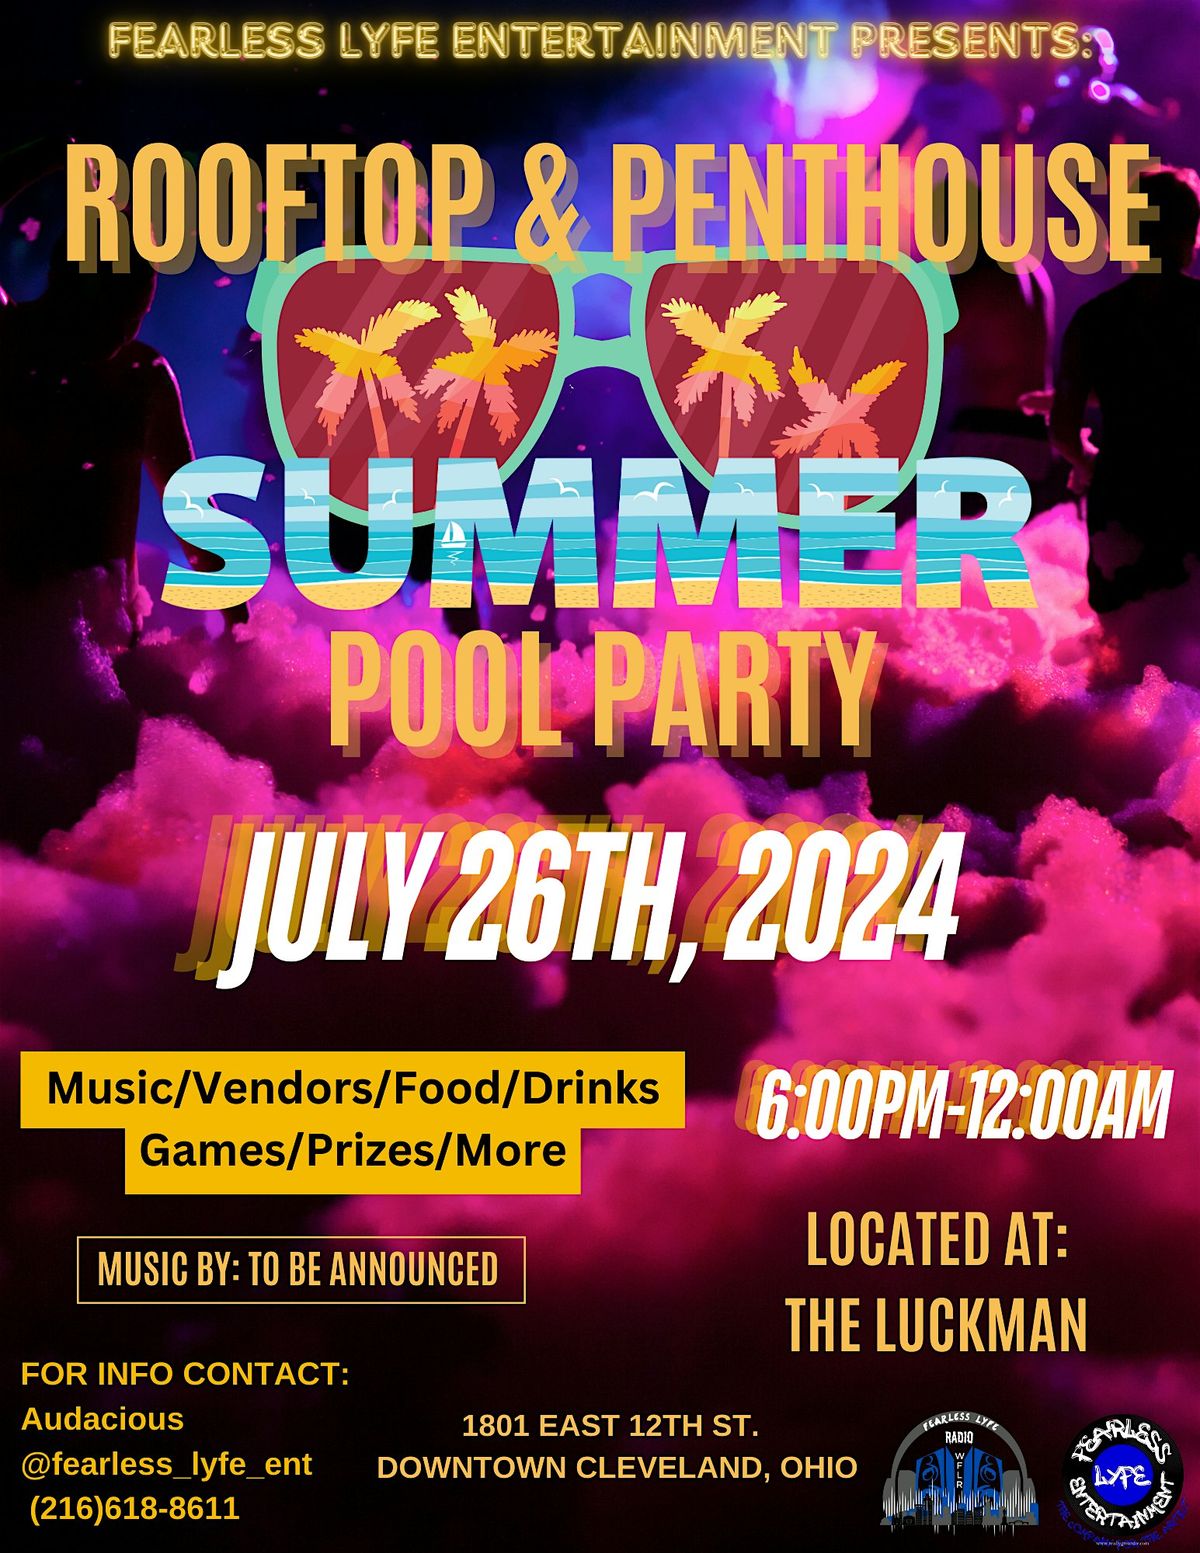 Fearless Lyfe Ent. Presents: The Rooftop Penthouse Pool Party